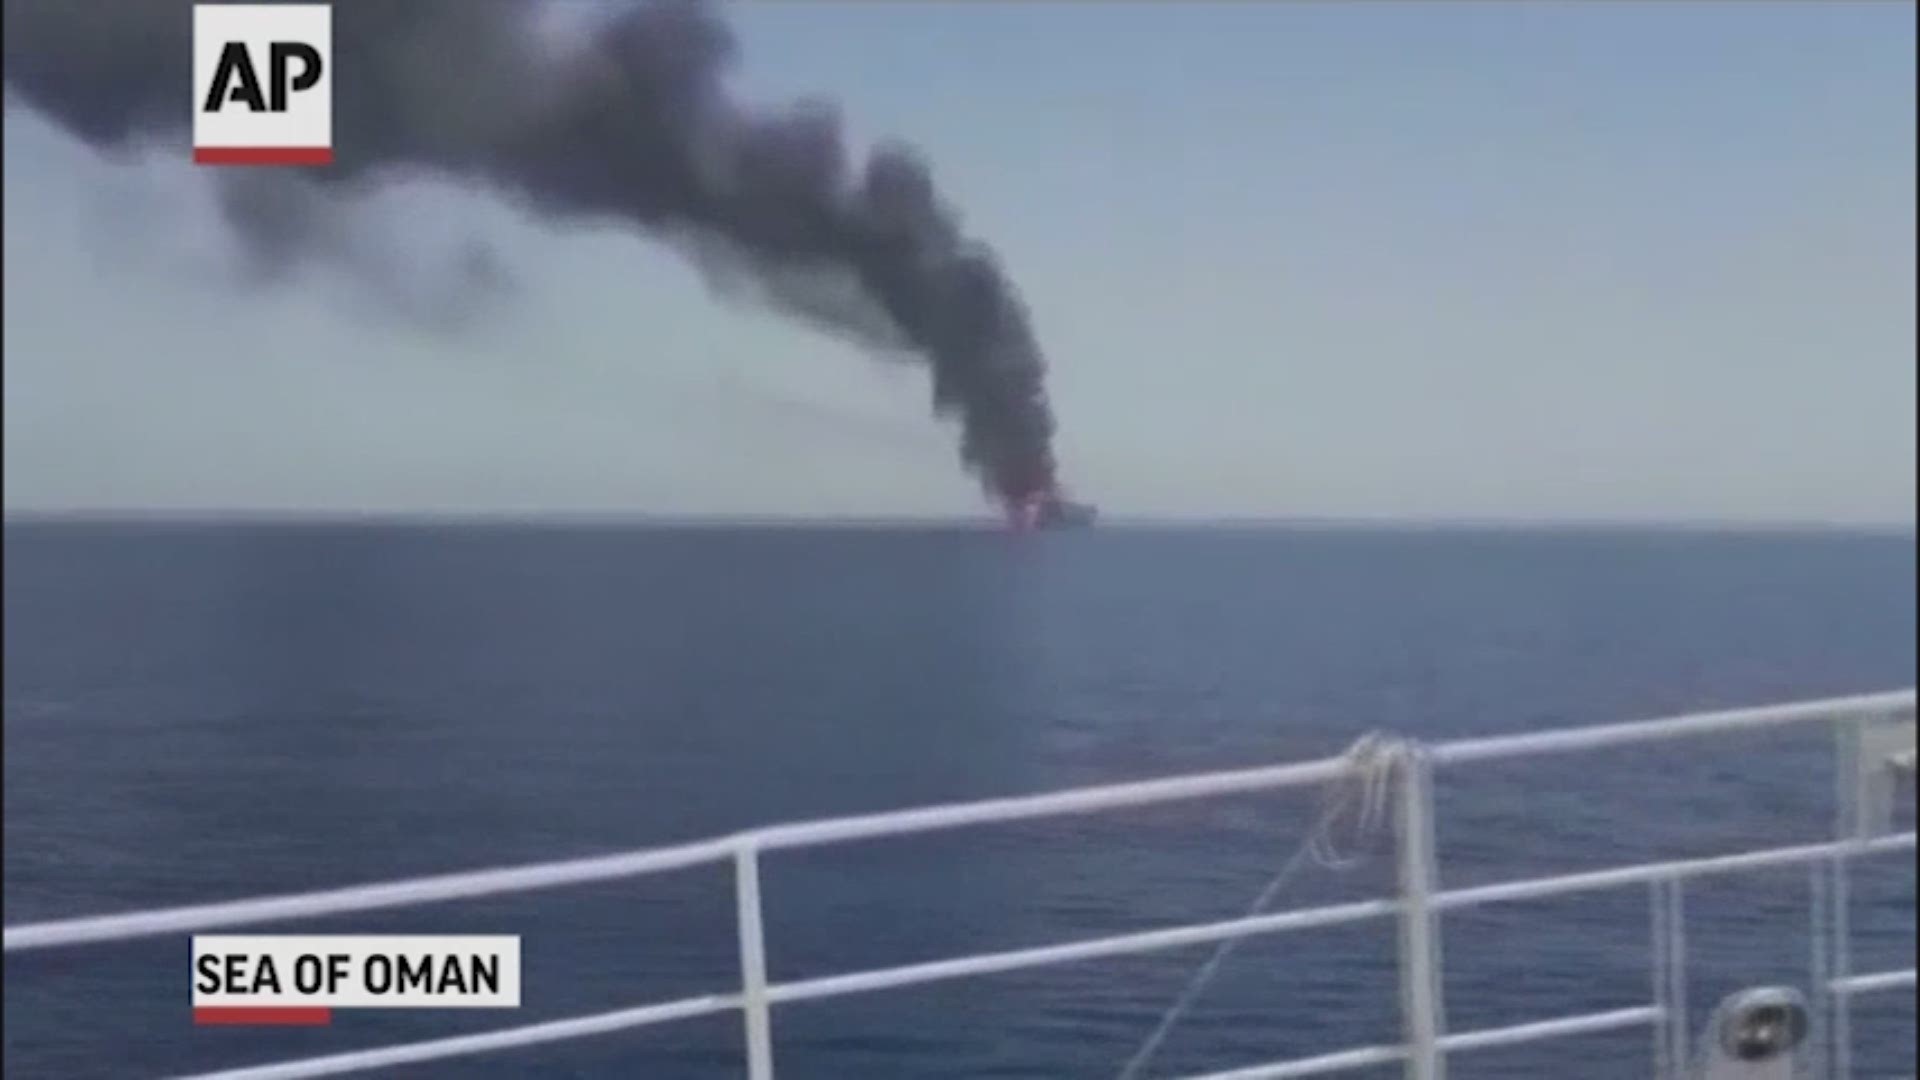 Two oil tankers near the Strait of Hormuz were damaged in suspected attacks on Thursday. (AP)